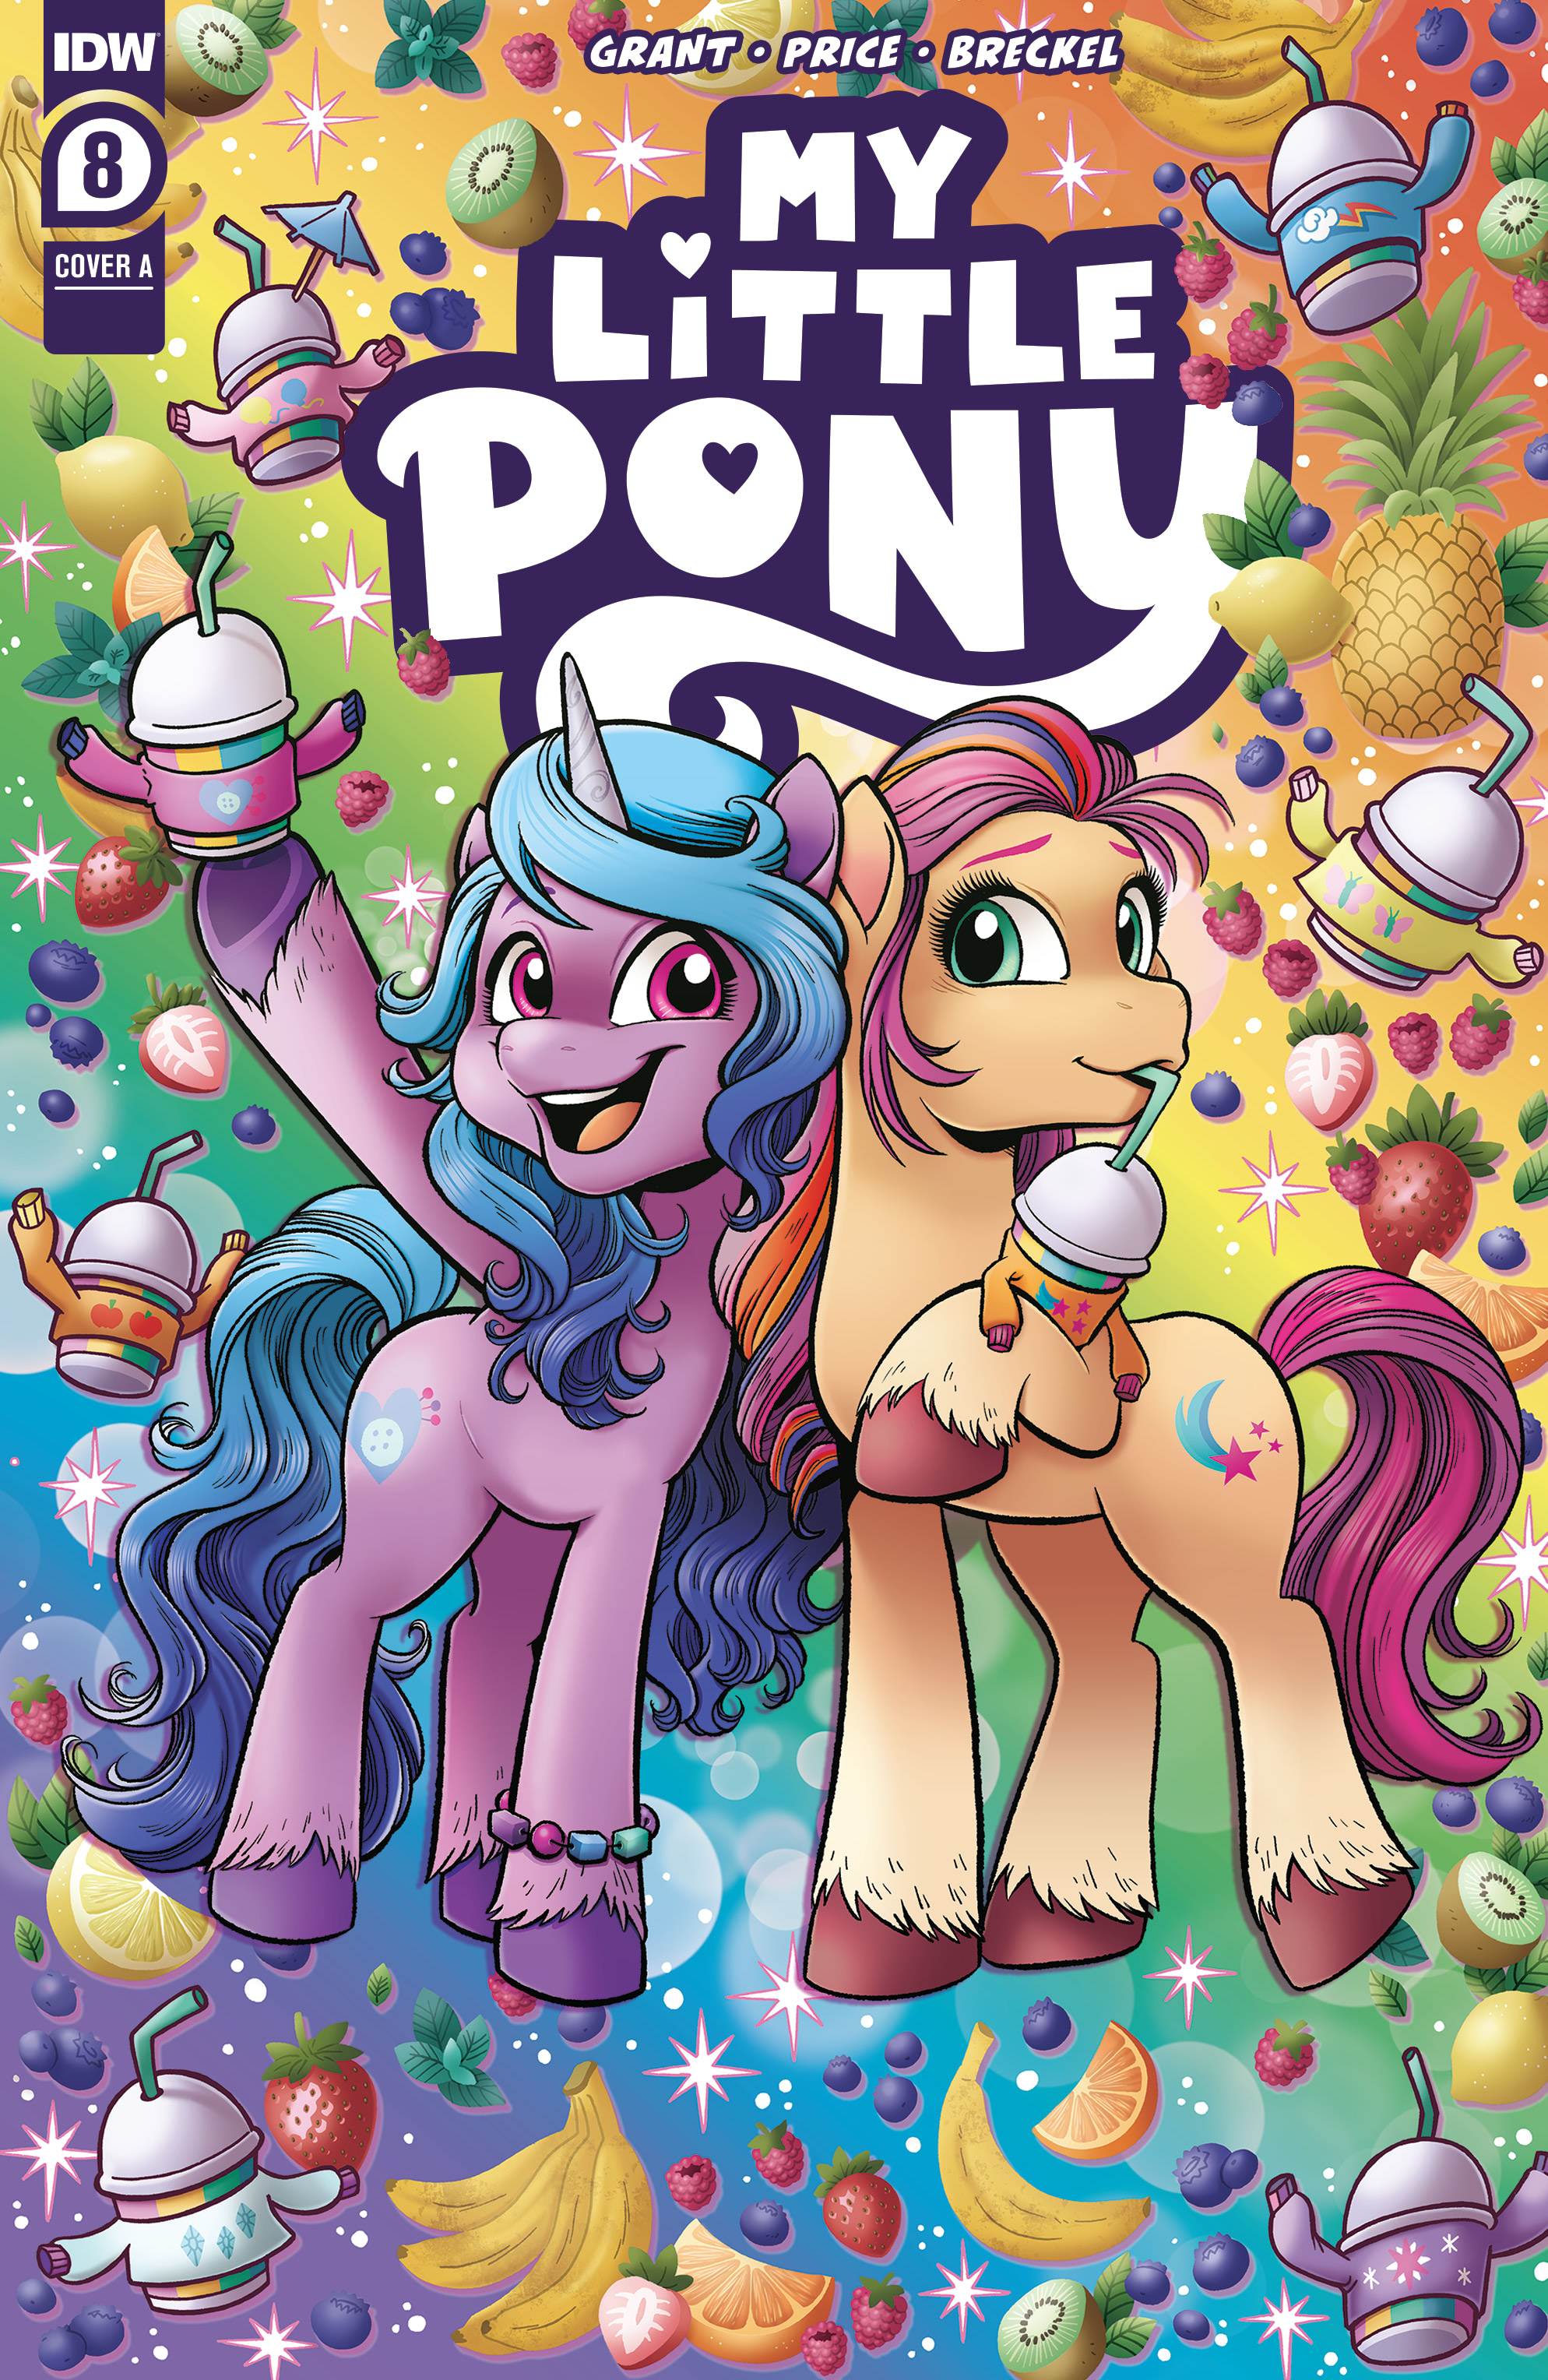 Read online My Little Pony comic -  Issue #8 - 1